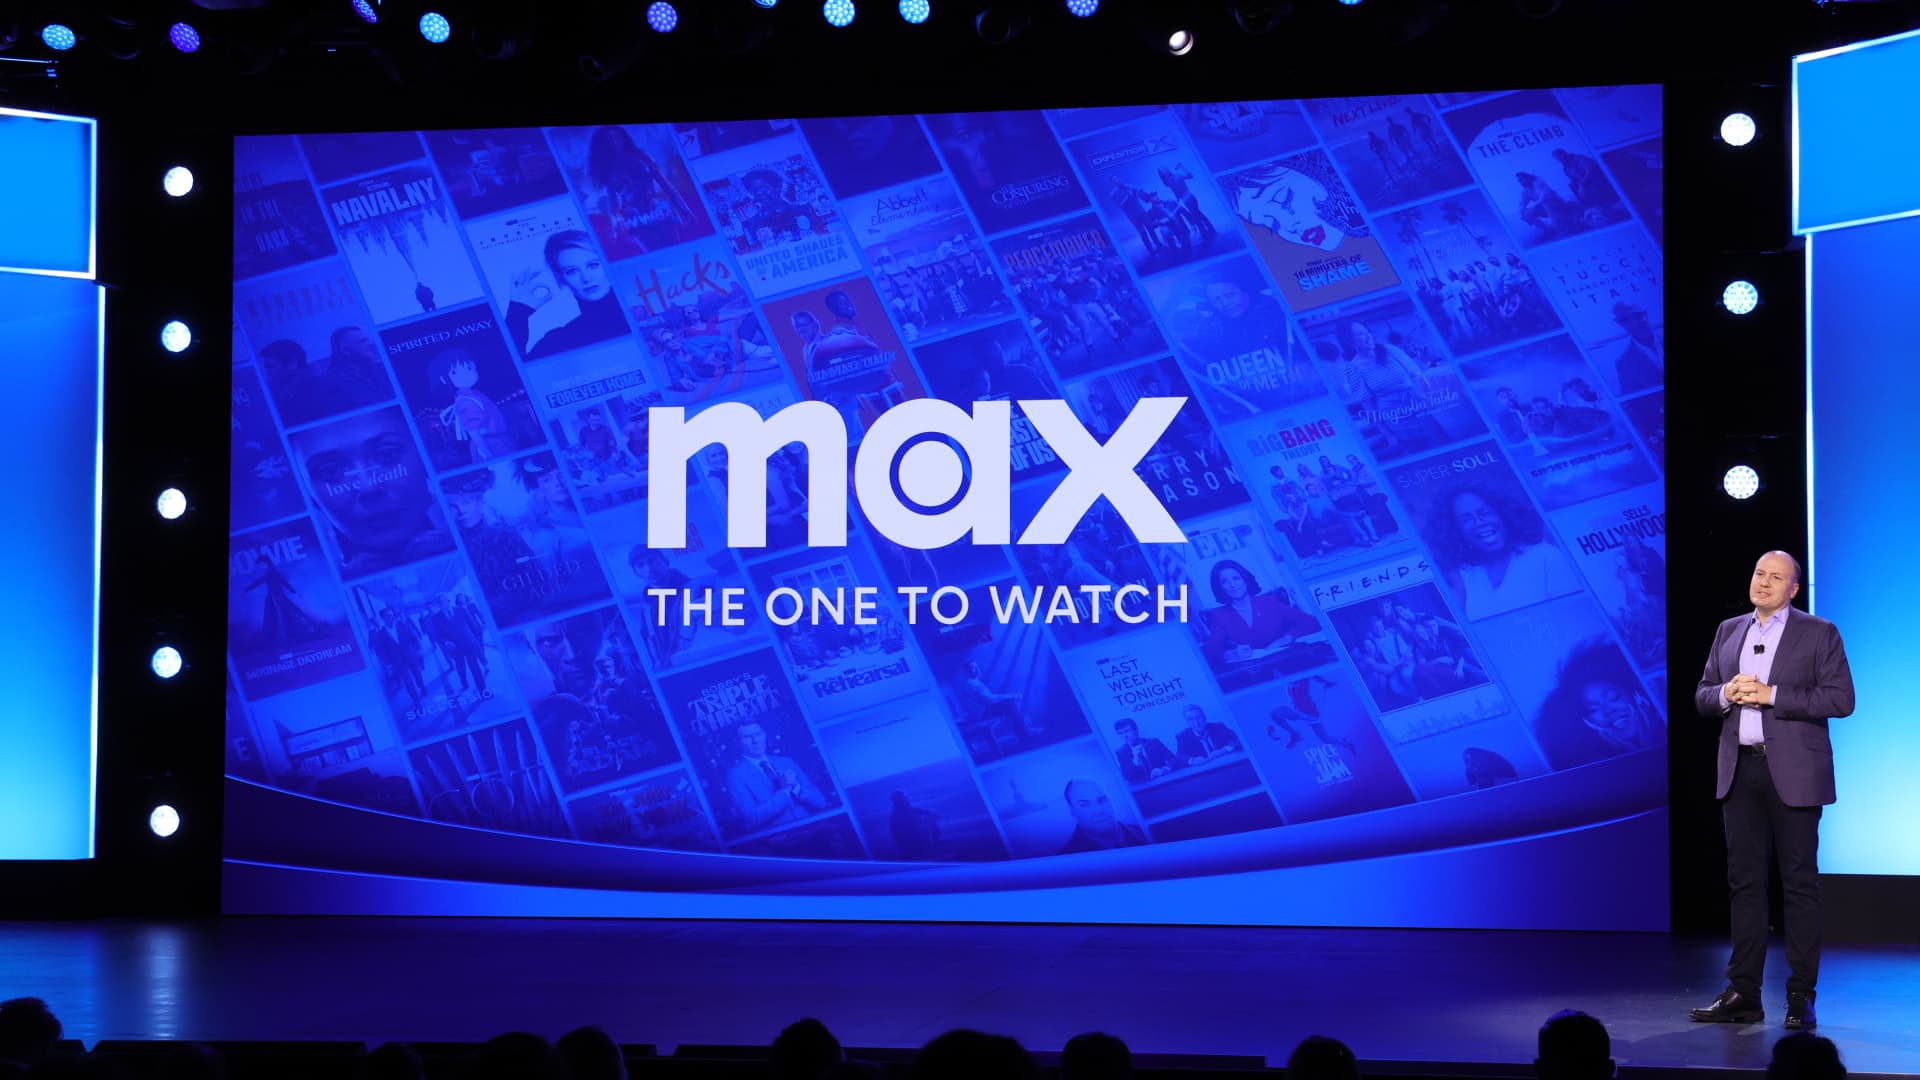 5 things to know about Max, the streamer uniting HBO Max and